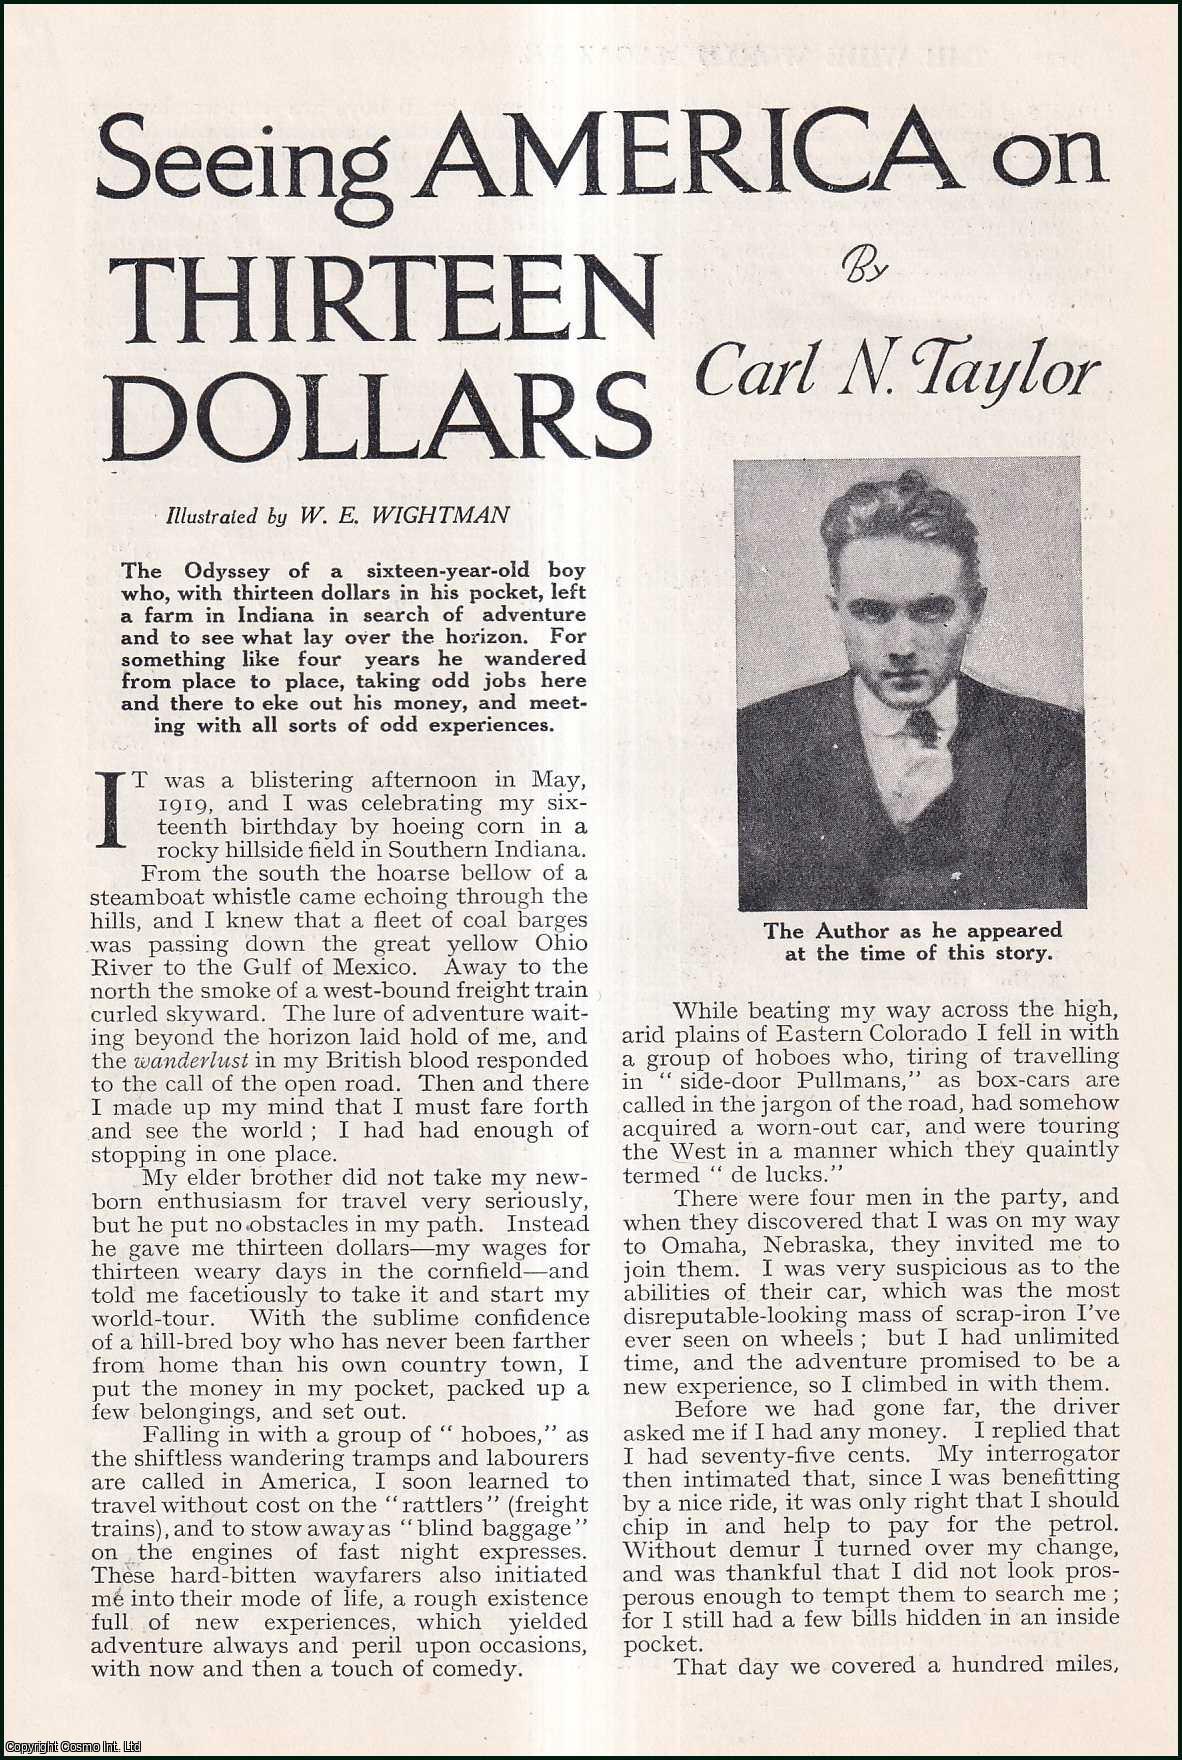 Carl N. Taylor. Illustrated by W.E. Wightman. - Seeing America on Thirteen Dollars. An uncommon original article from the Wide World Magazine, 1929.